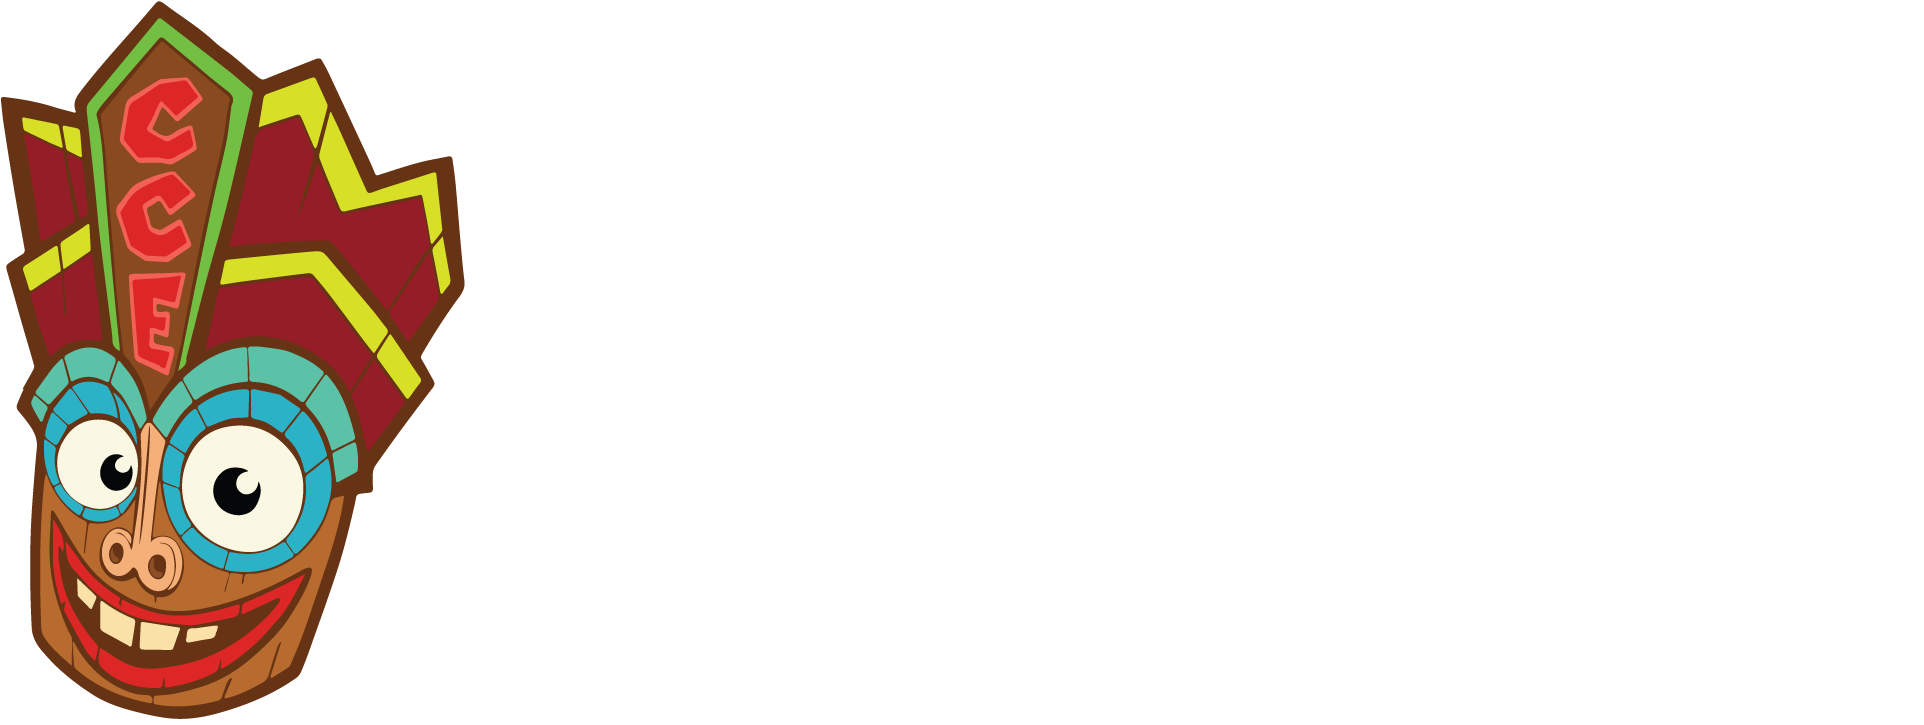 Creative Capers Entertainment - Creative Capers (1938x762), Png Download